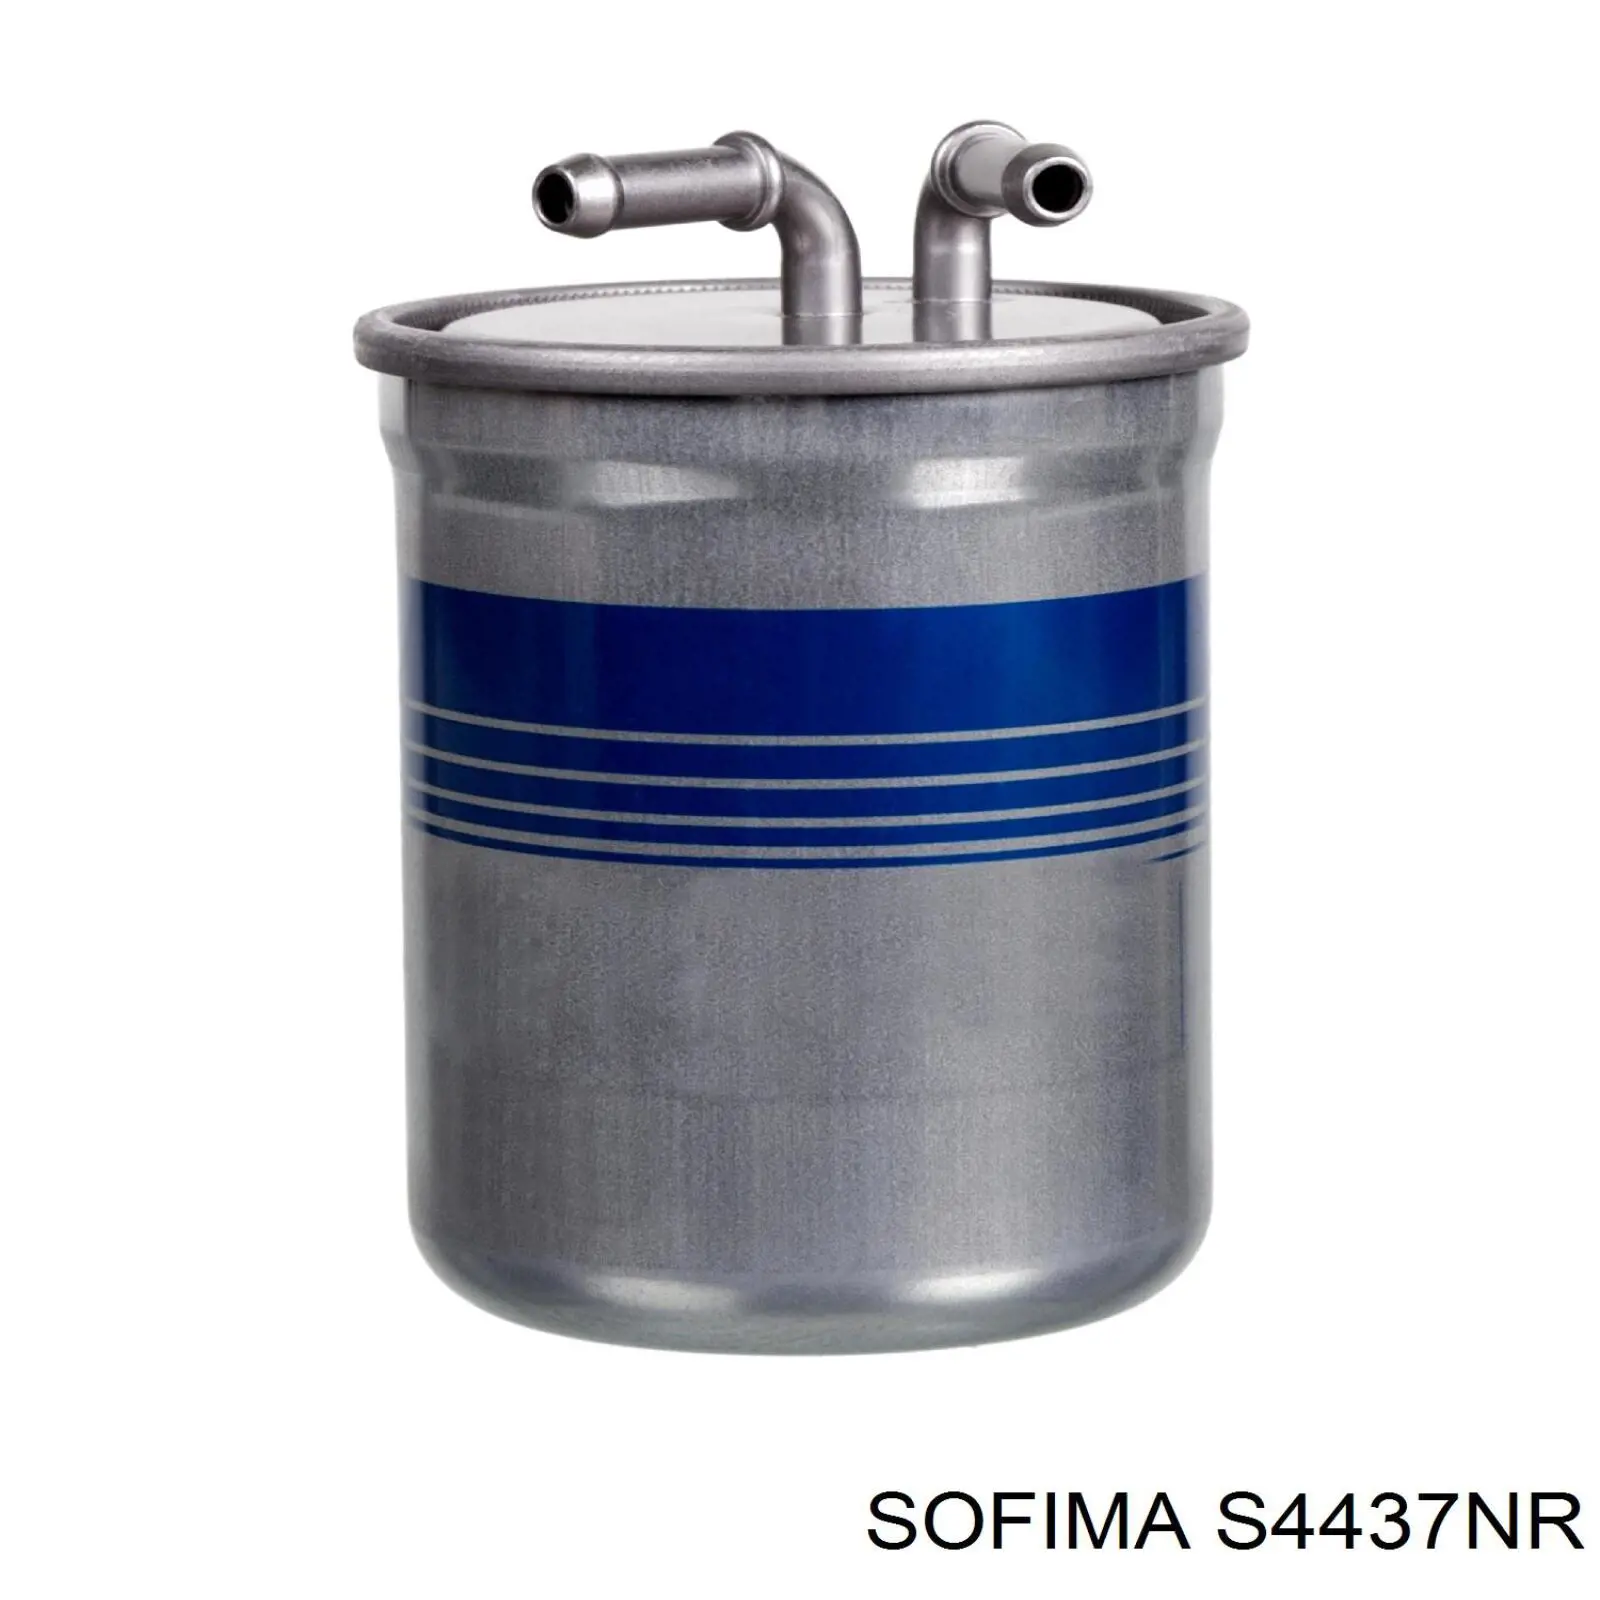 S 4437 NR Sofima filtro combustible